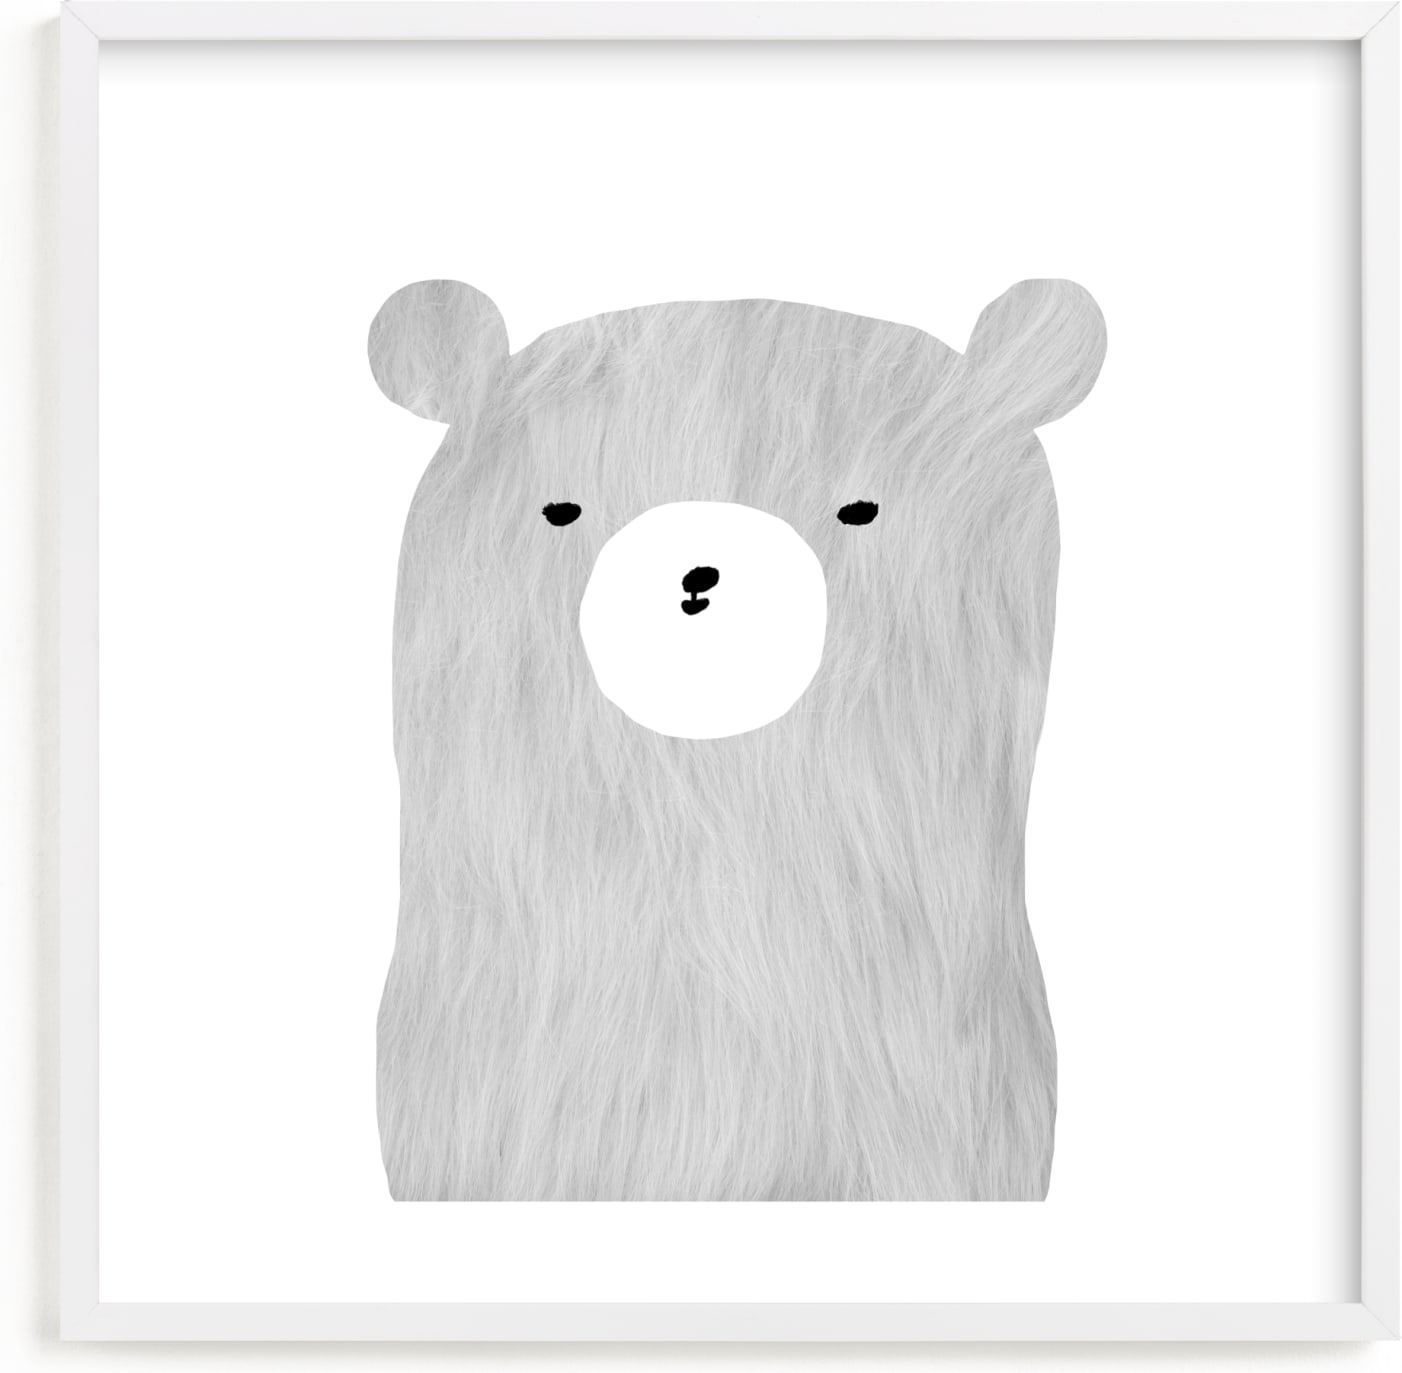 This is a black and white nursery wall art by Susanne Kasielke called furry bear.